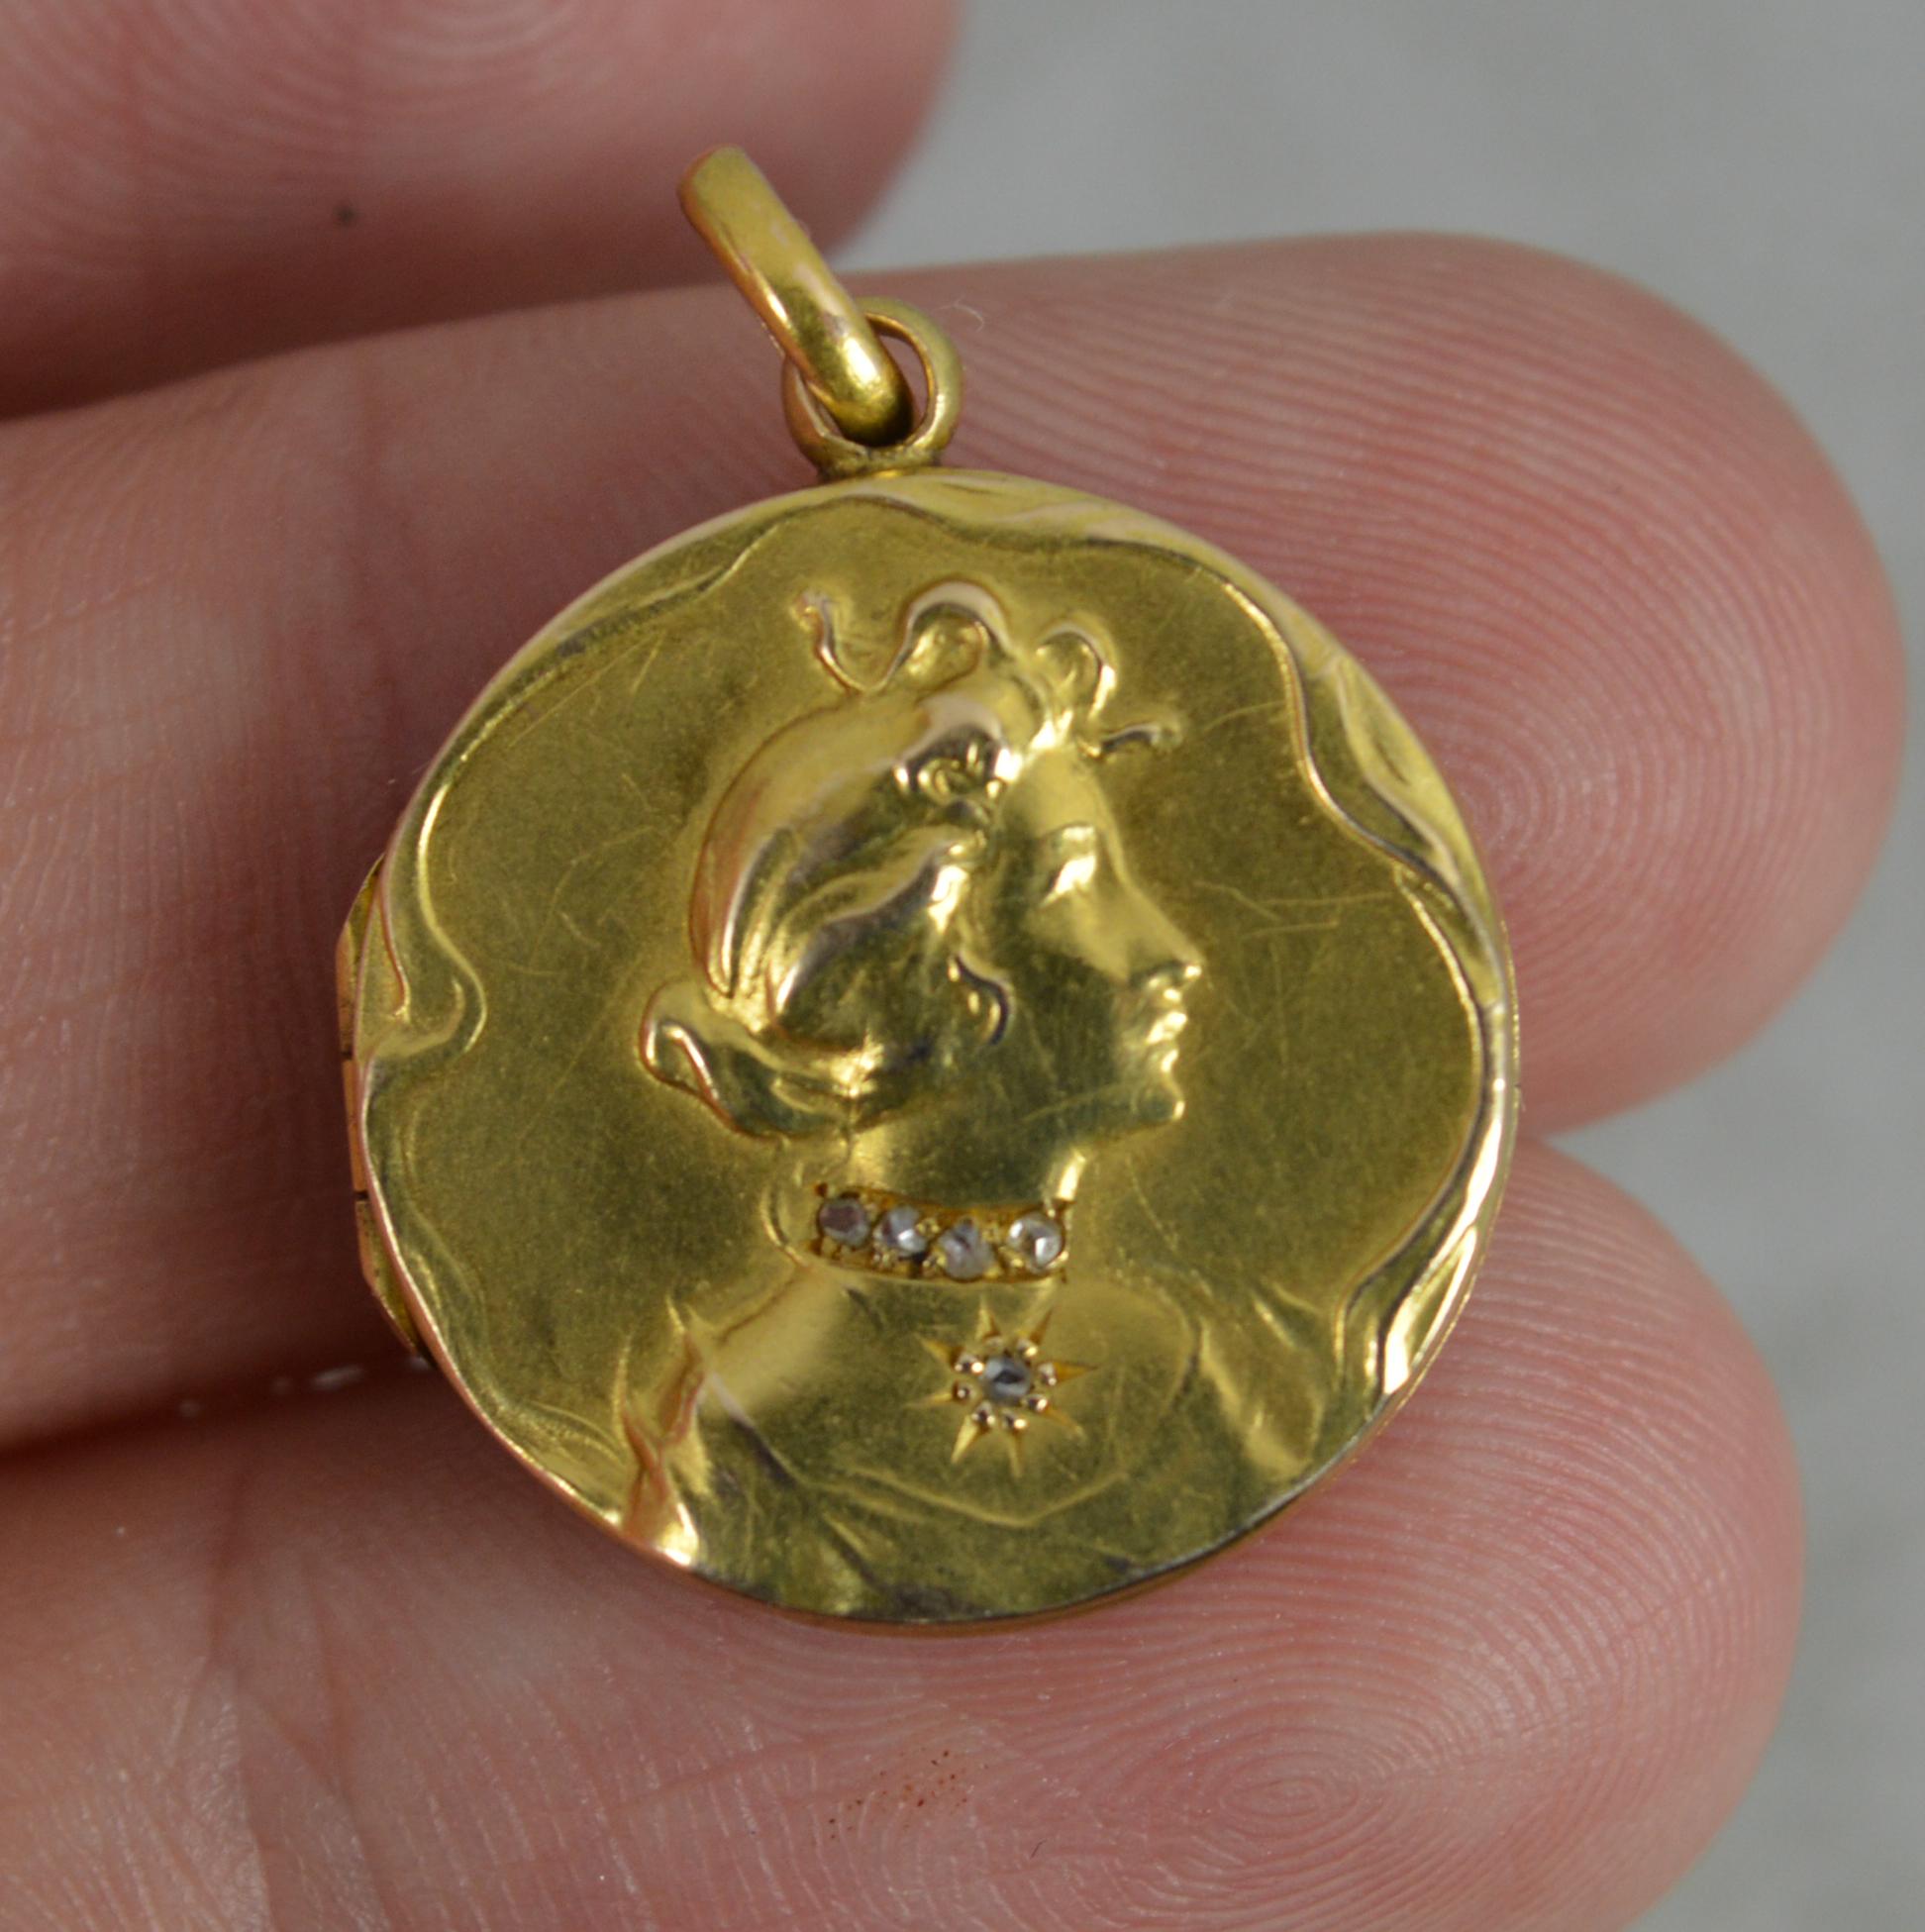 A stunning Edwardian era pendant or locket.
Solid 15 carat yellow gold example.
Circular example with a female bust to centre set with four rose cut diamonds creating a necklace and a further diamond below creating a star pendant.

CONDITION ; Very